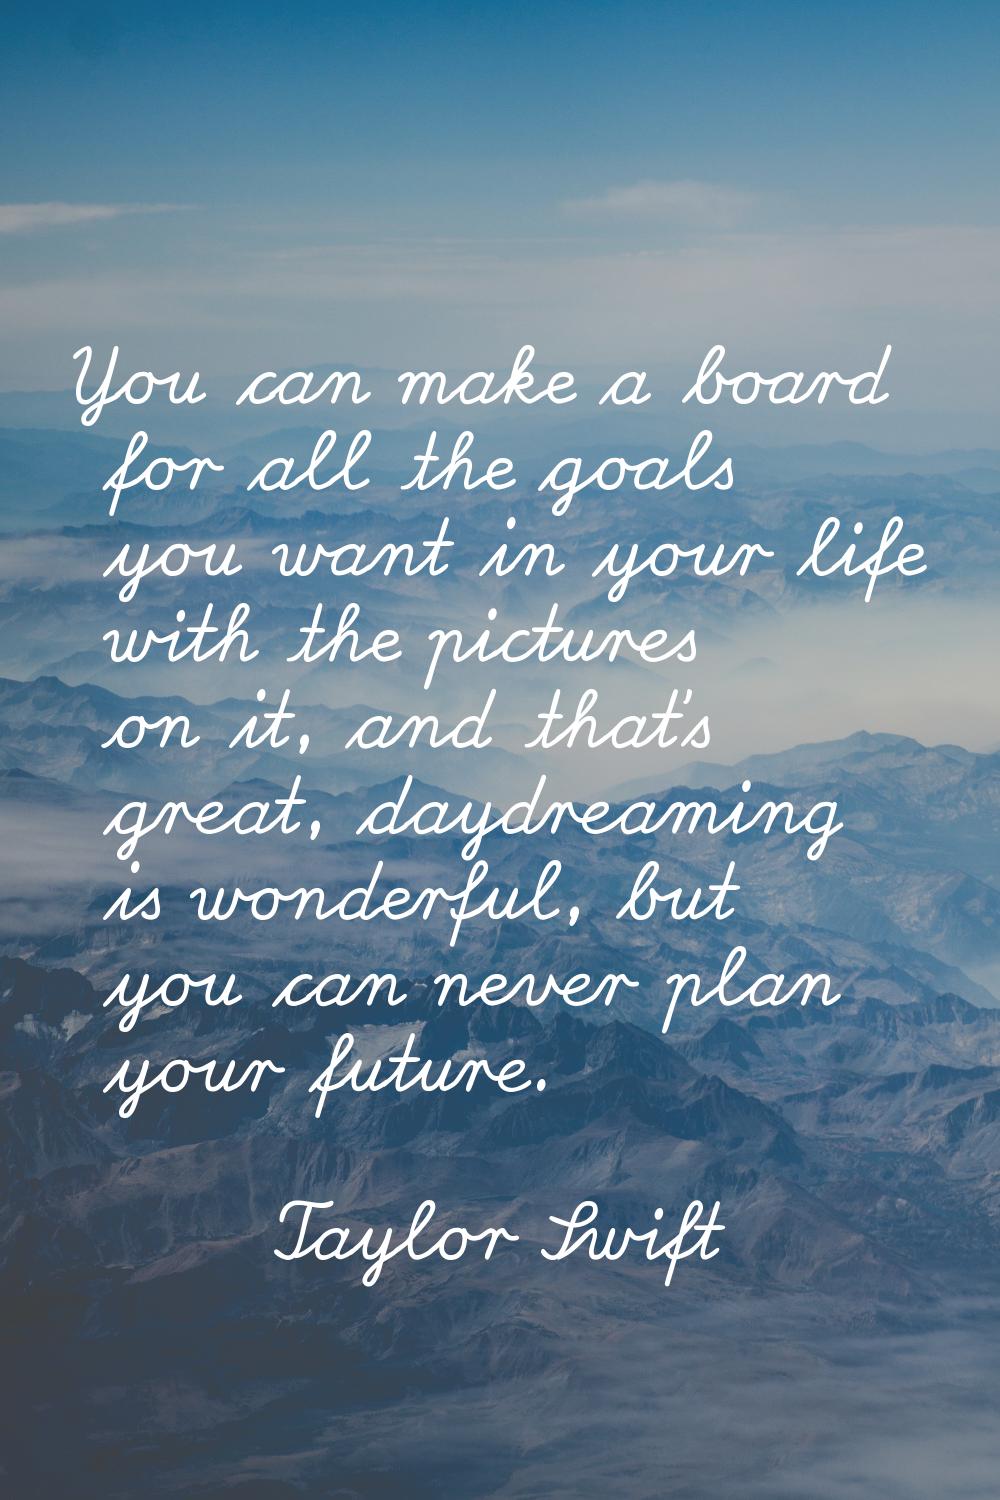 You can make a board for all the goals you want in your life with the pictures on it, and that's gr